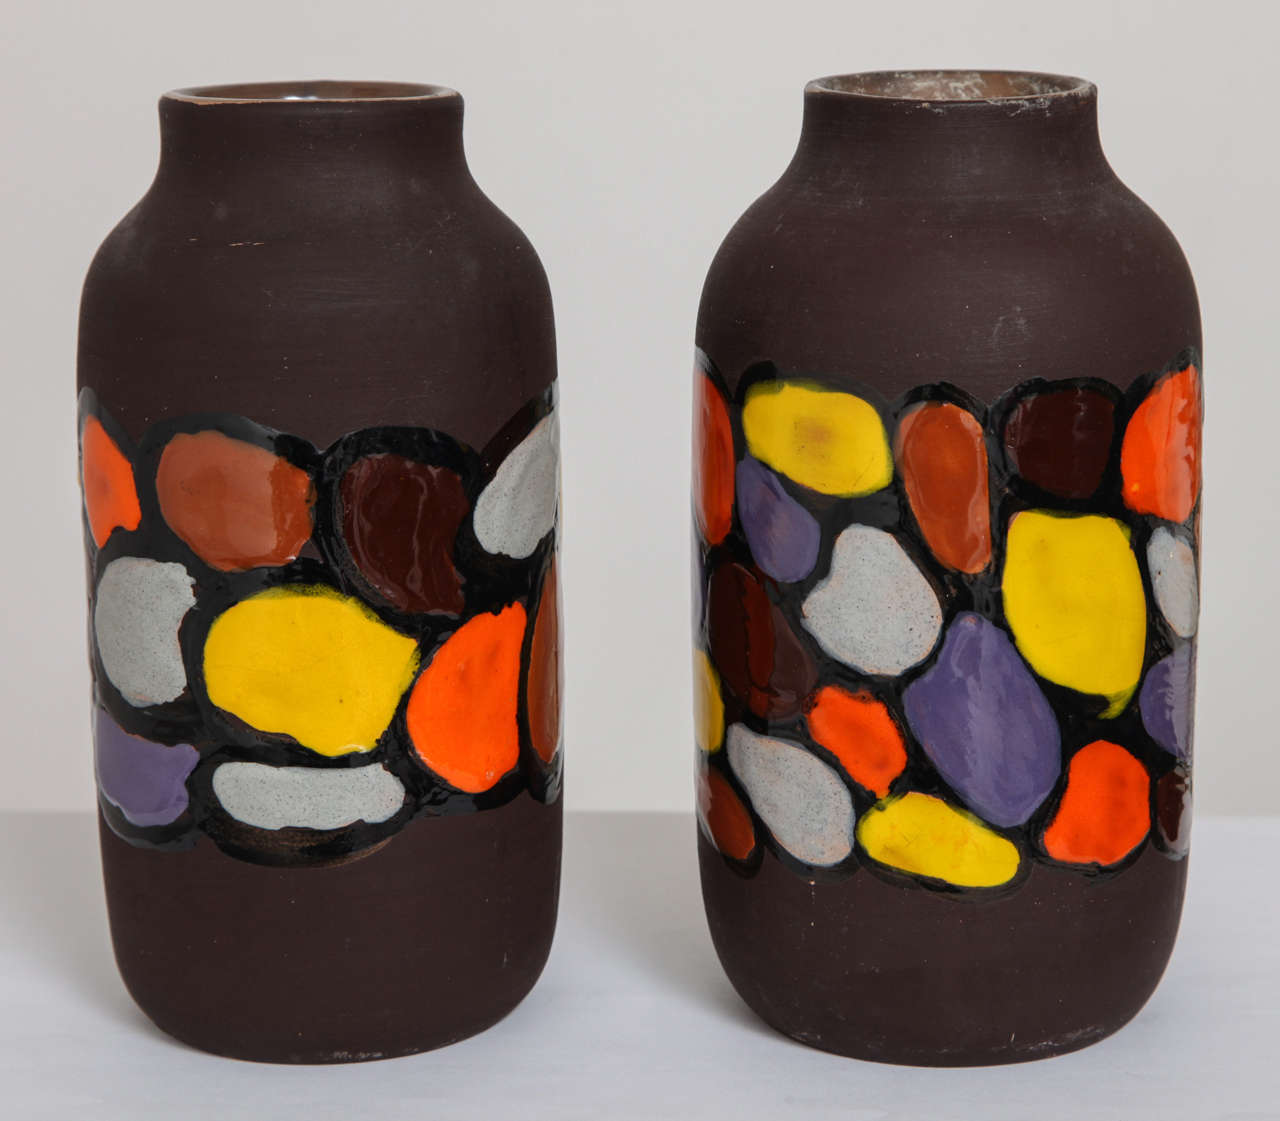 Store closing-- last day is 7/31. Offers welcome! Fantastic ceramic vases featuring matte brown bodies with pops of vibrant color. Bitossi design #1613 as signed to base. One retains the original Raymor sticker.